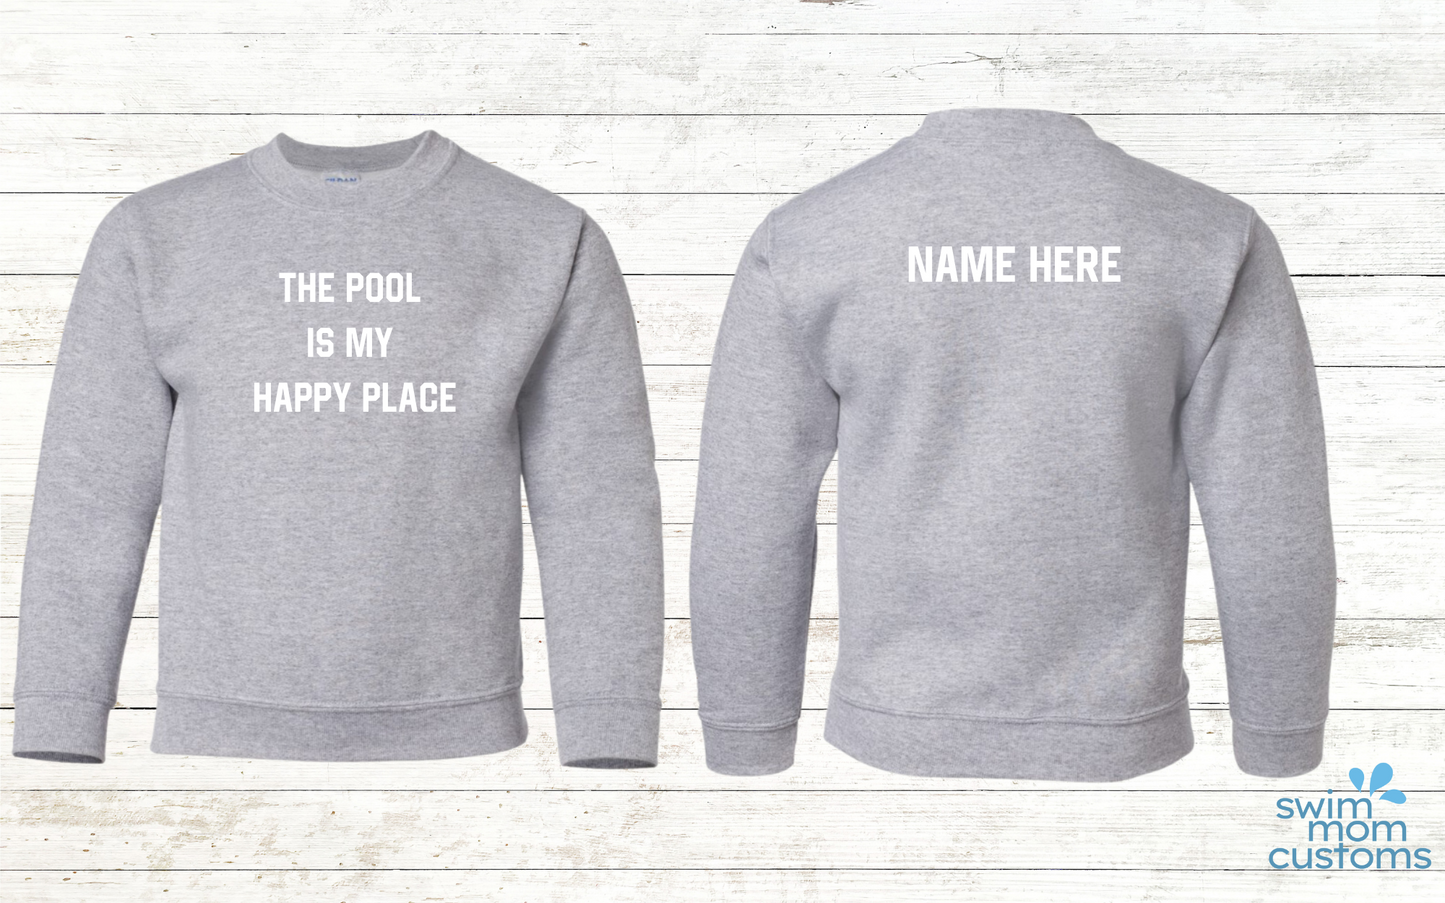 The pool is my happy place - Back of Sweatshirt Personalization Option: Youth Sweatshirt